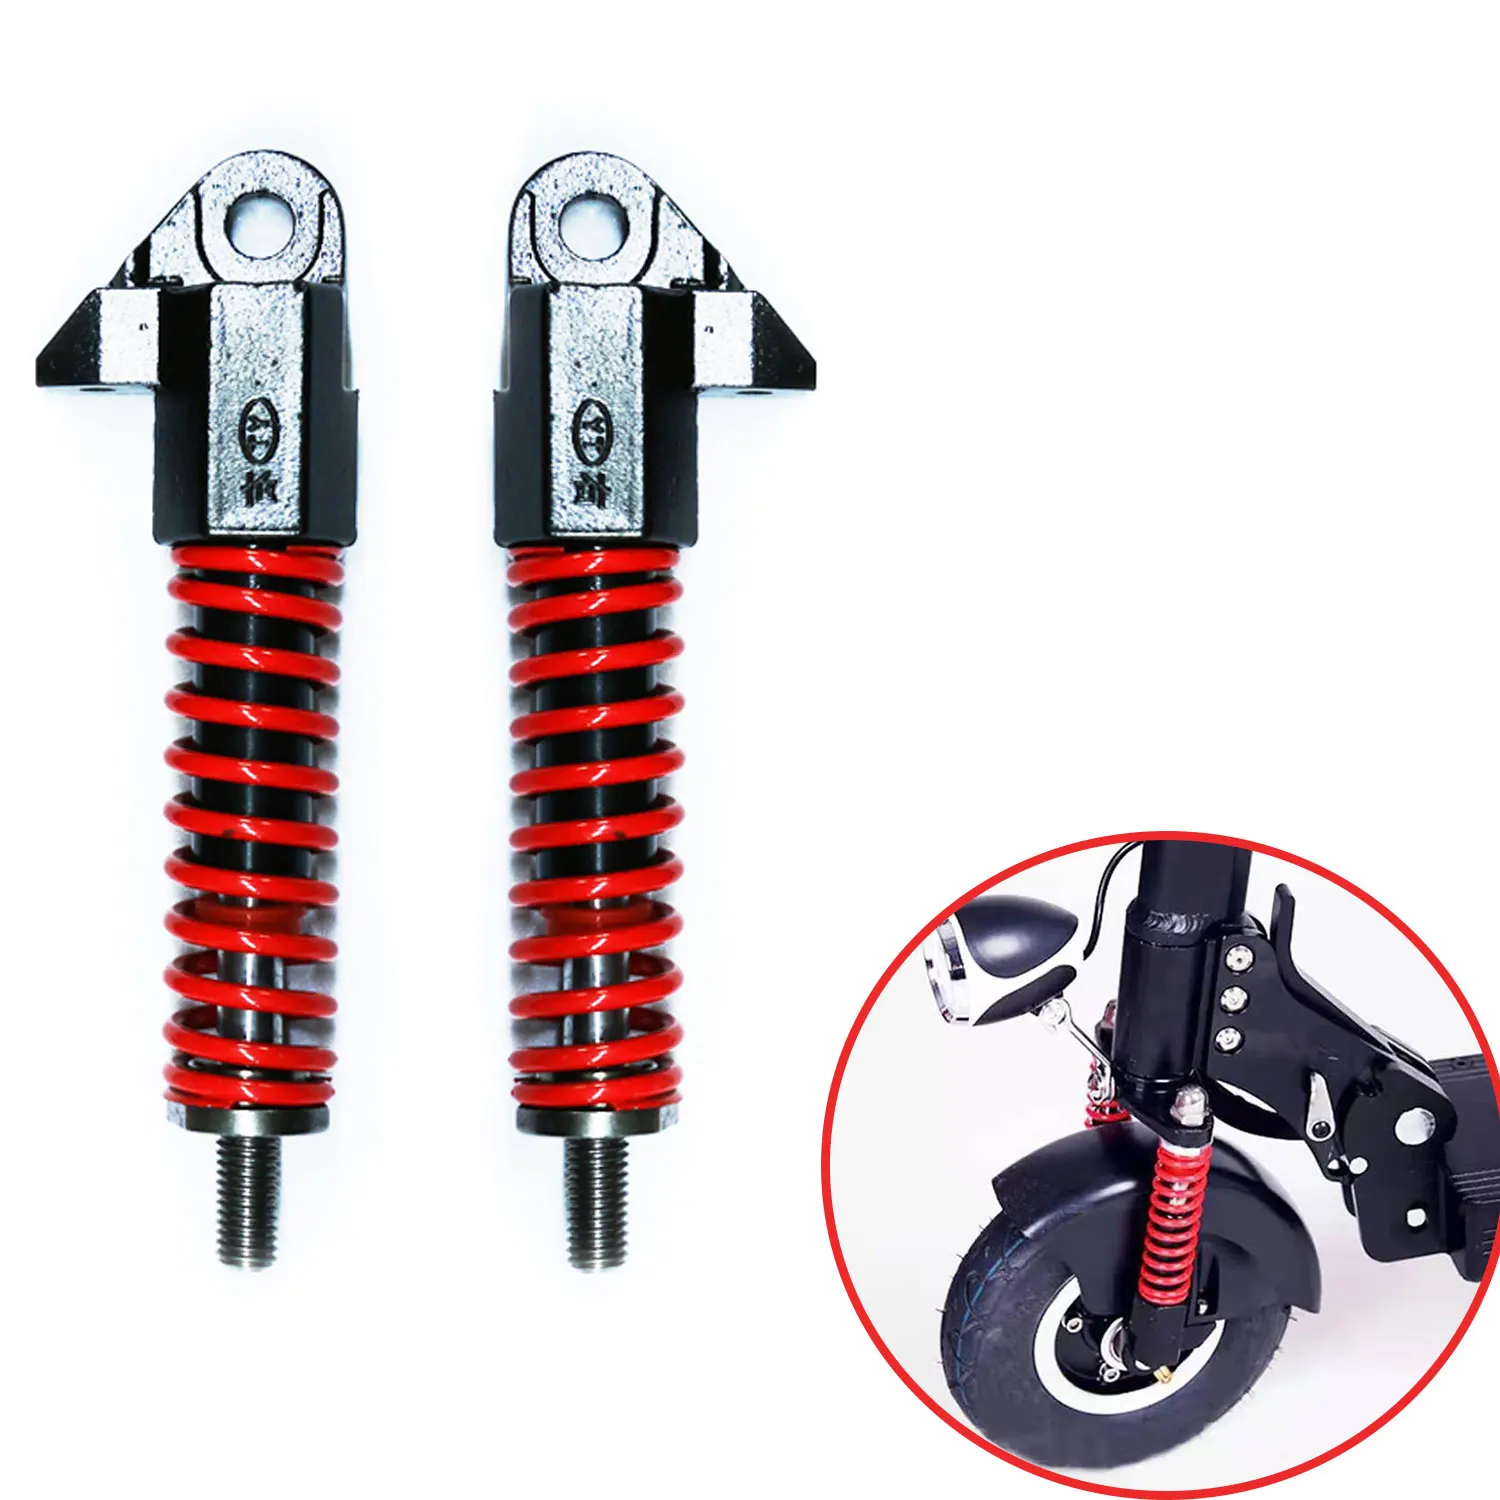 

8inch Front Suspension Shock Absorber for Electric Scooter Hydraulic Spring Shock Absorption Kit Front Suspension Fork Accessory